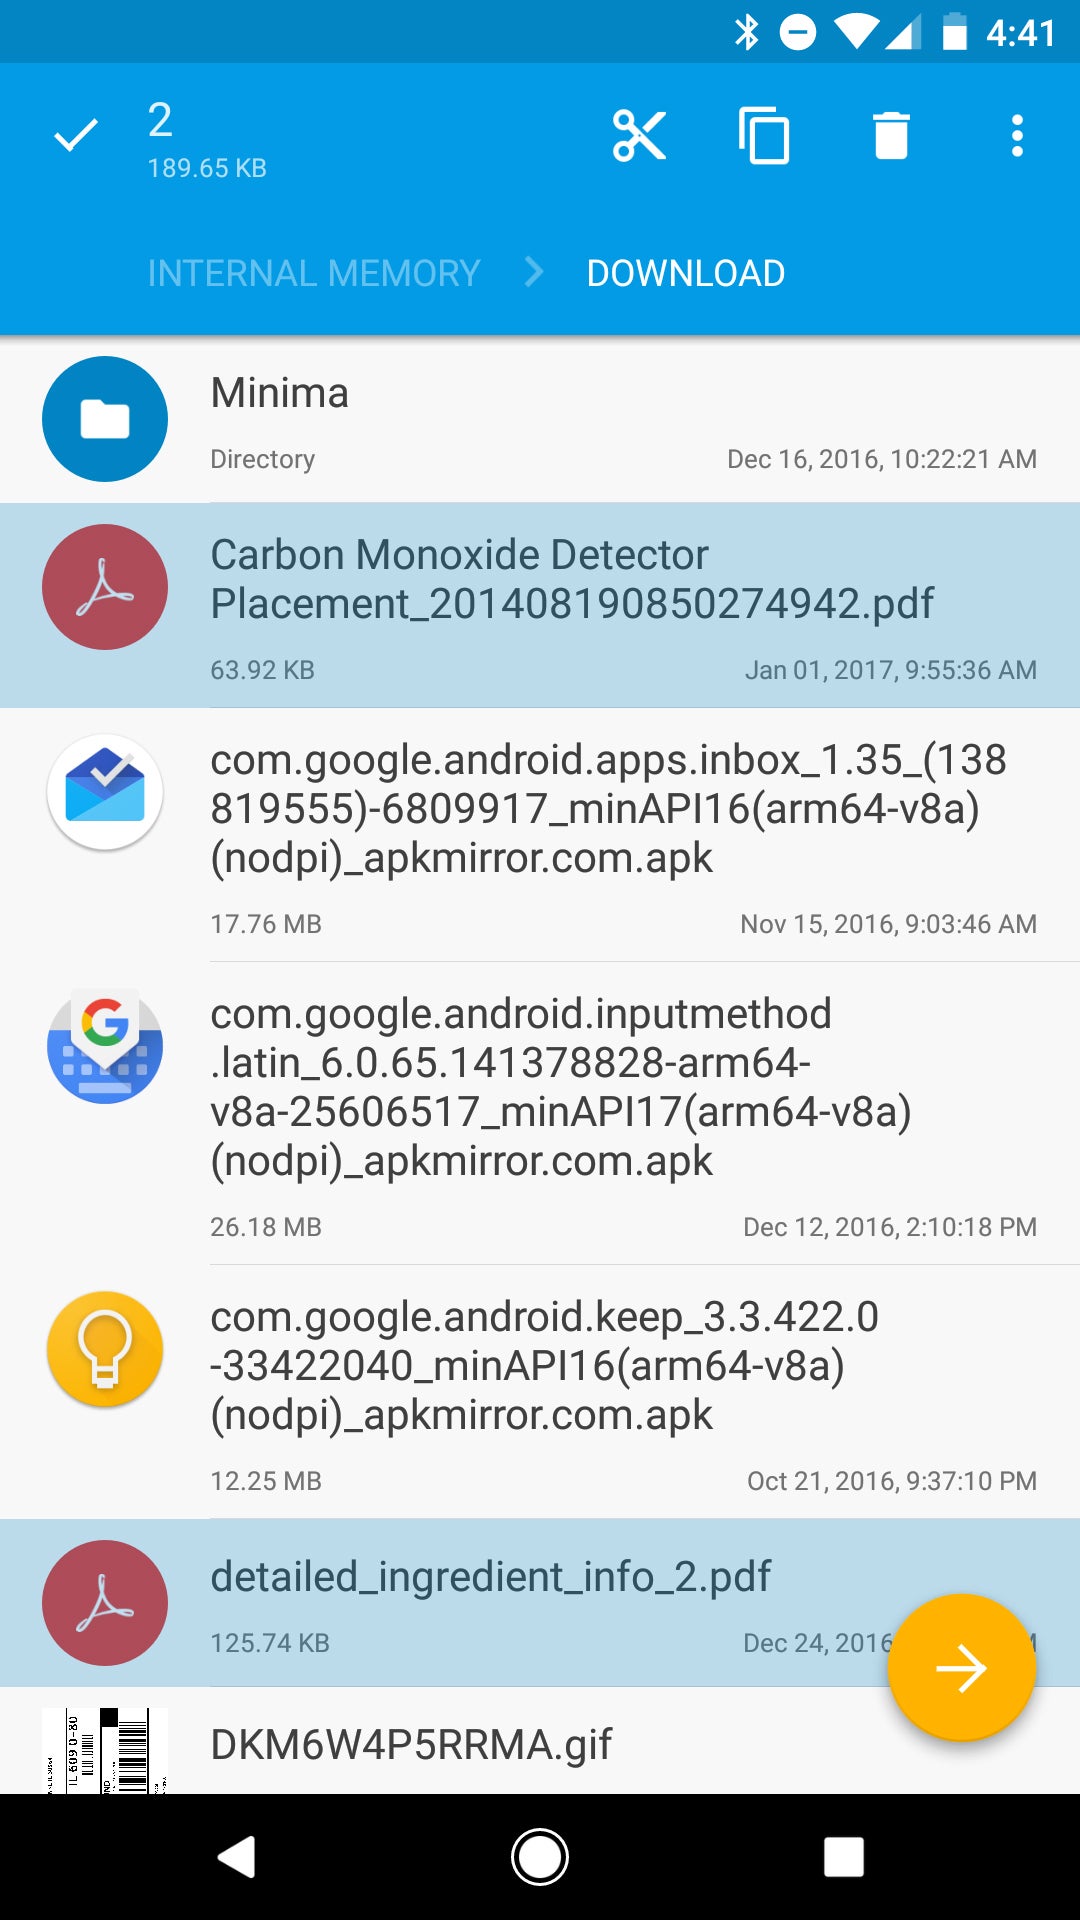 How to find and manage files on your phone